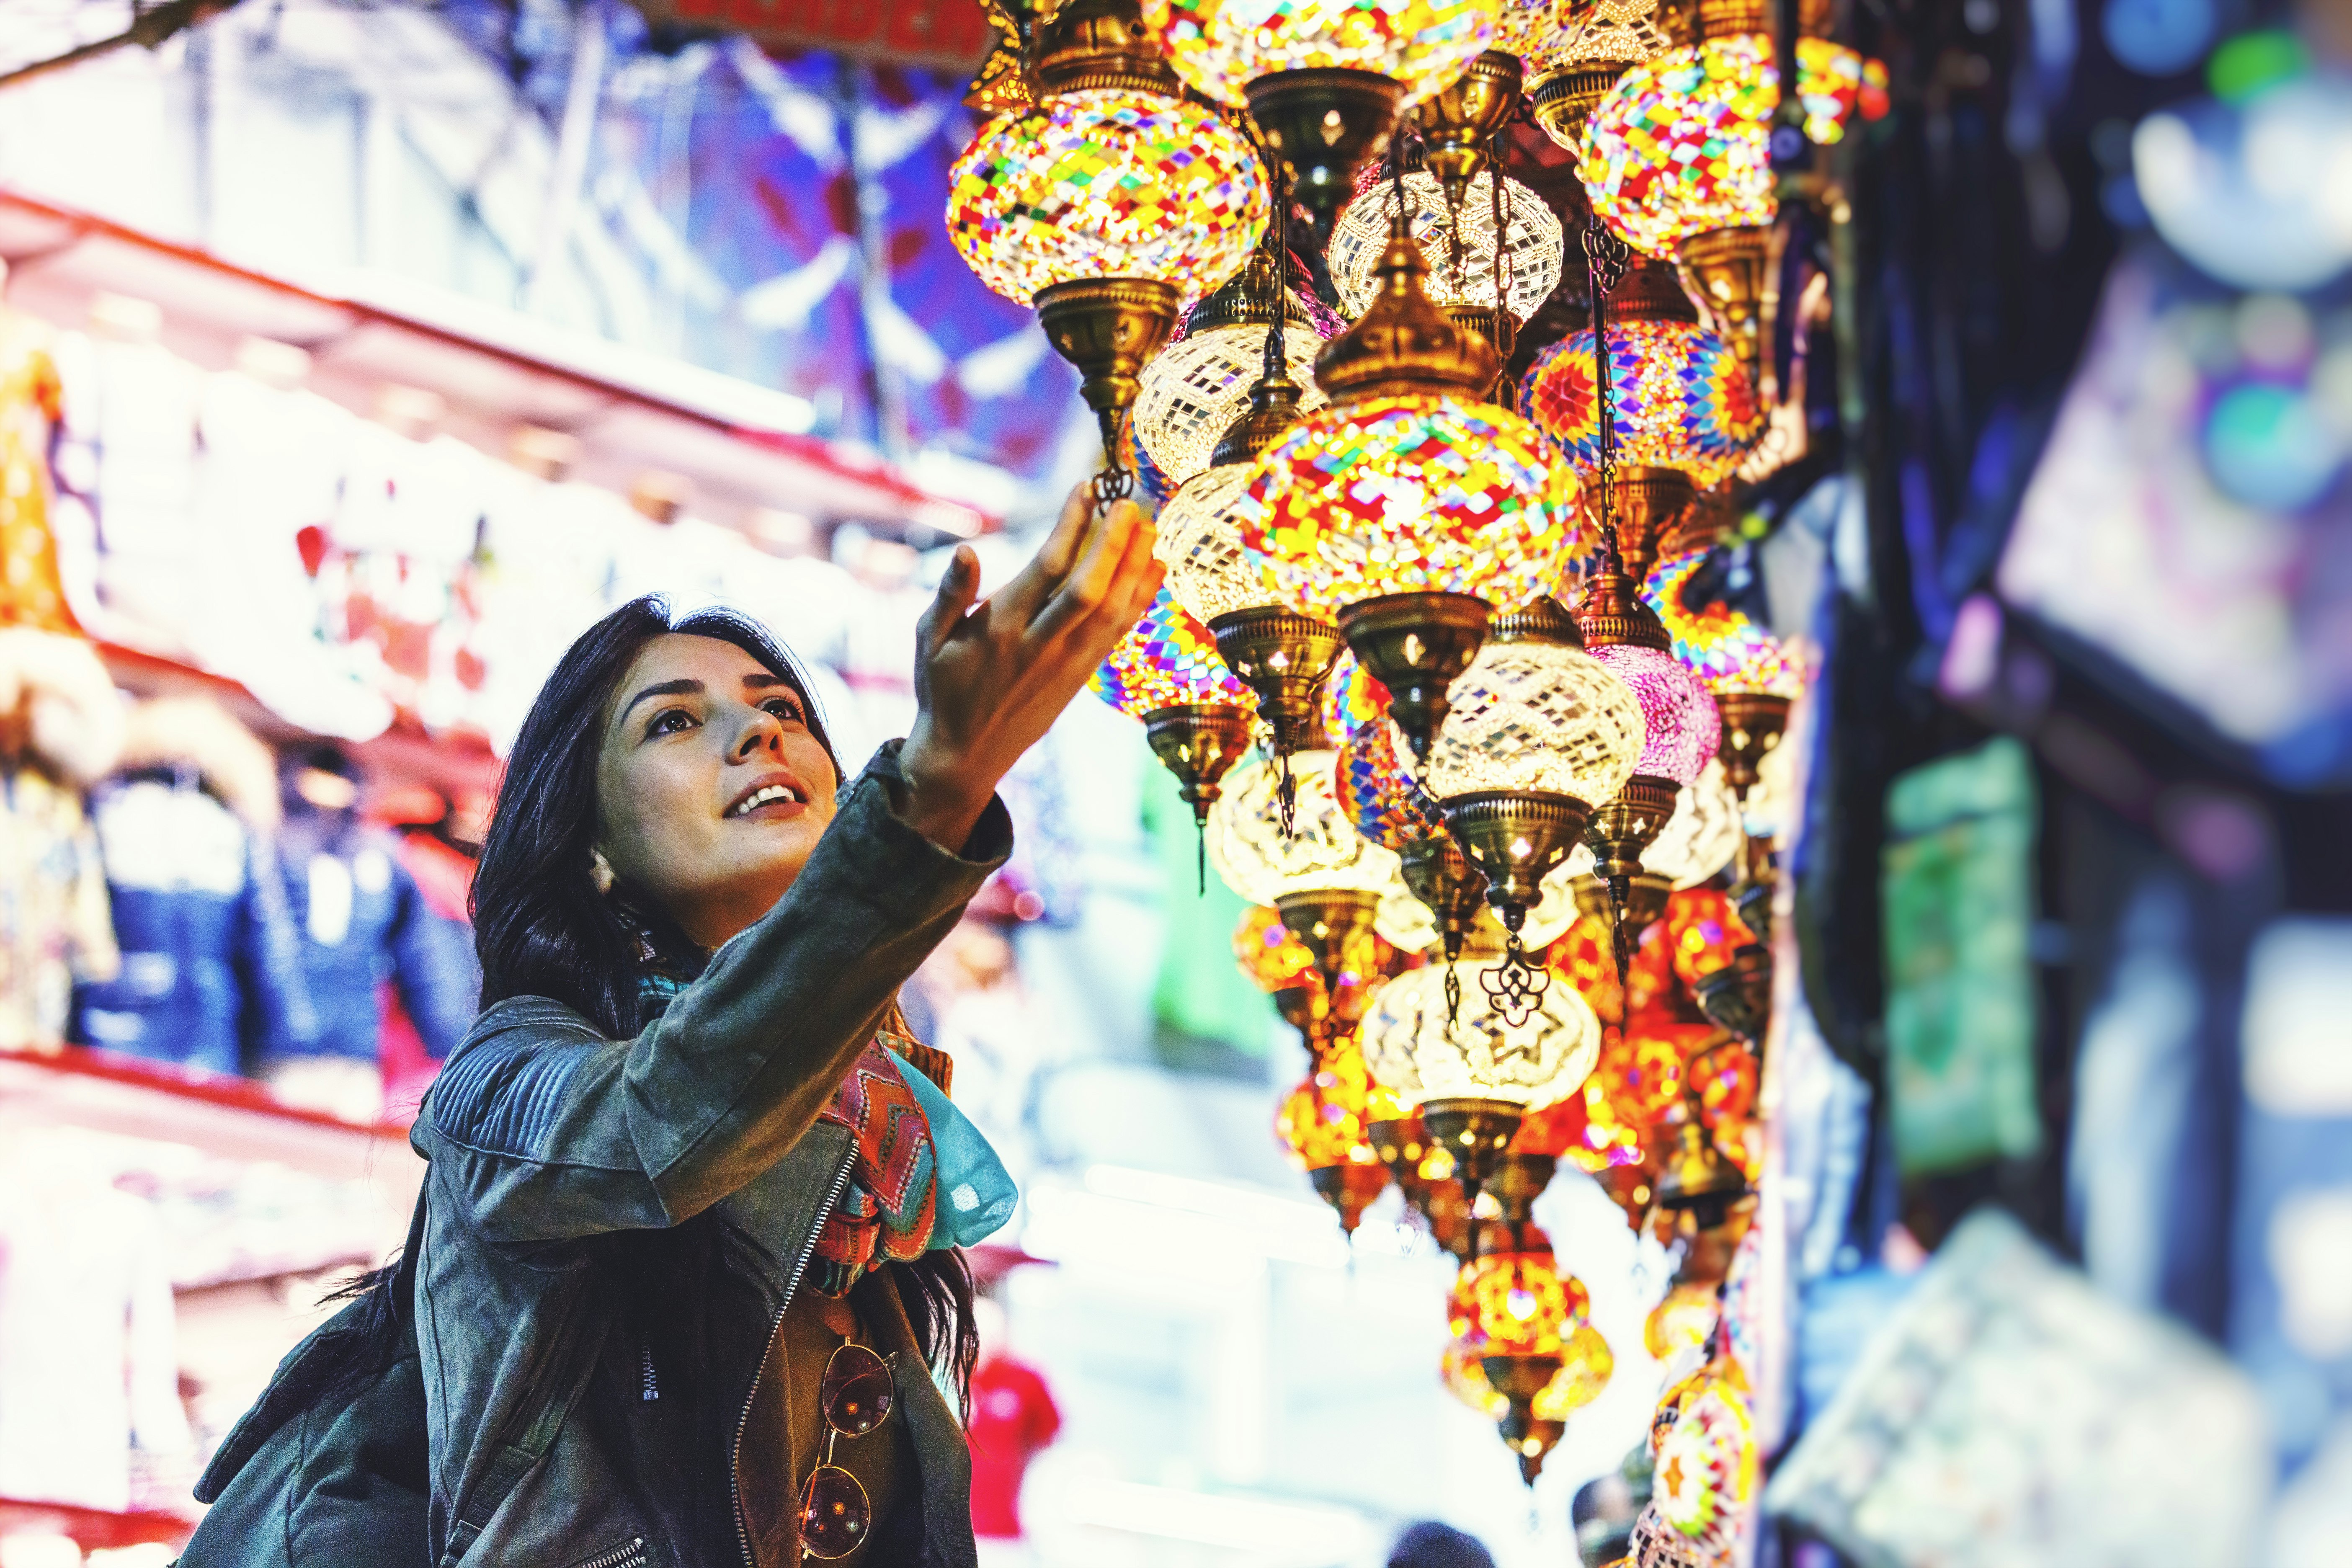 A woman lightly touches a multi-colored and ornate lantern hanging from a shop stall 